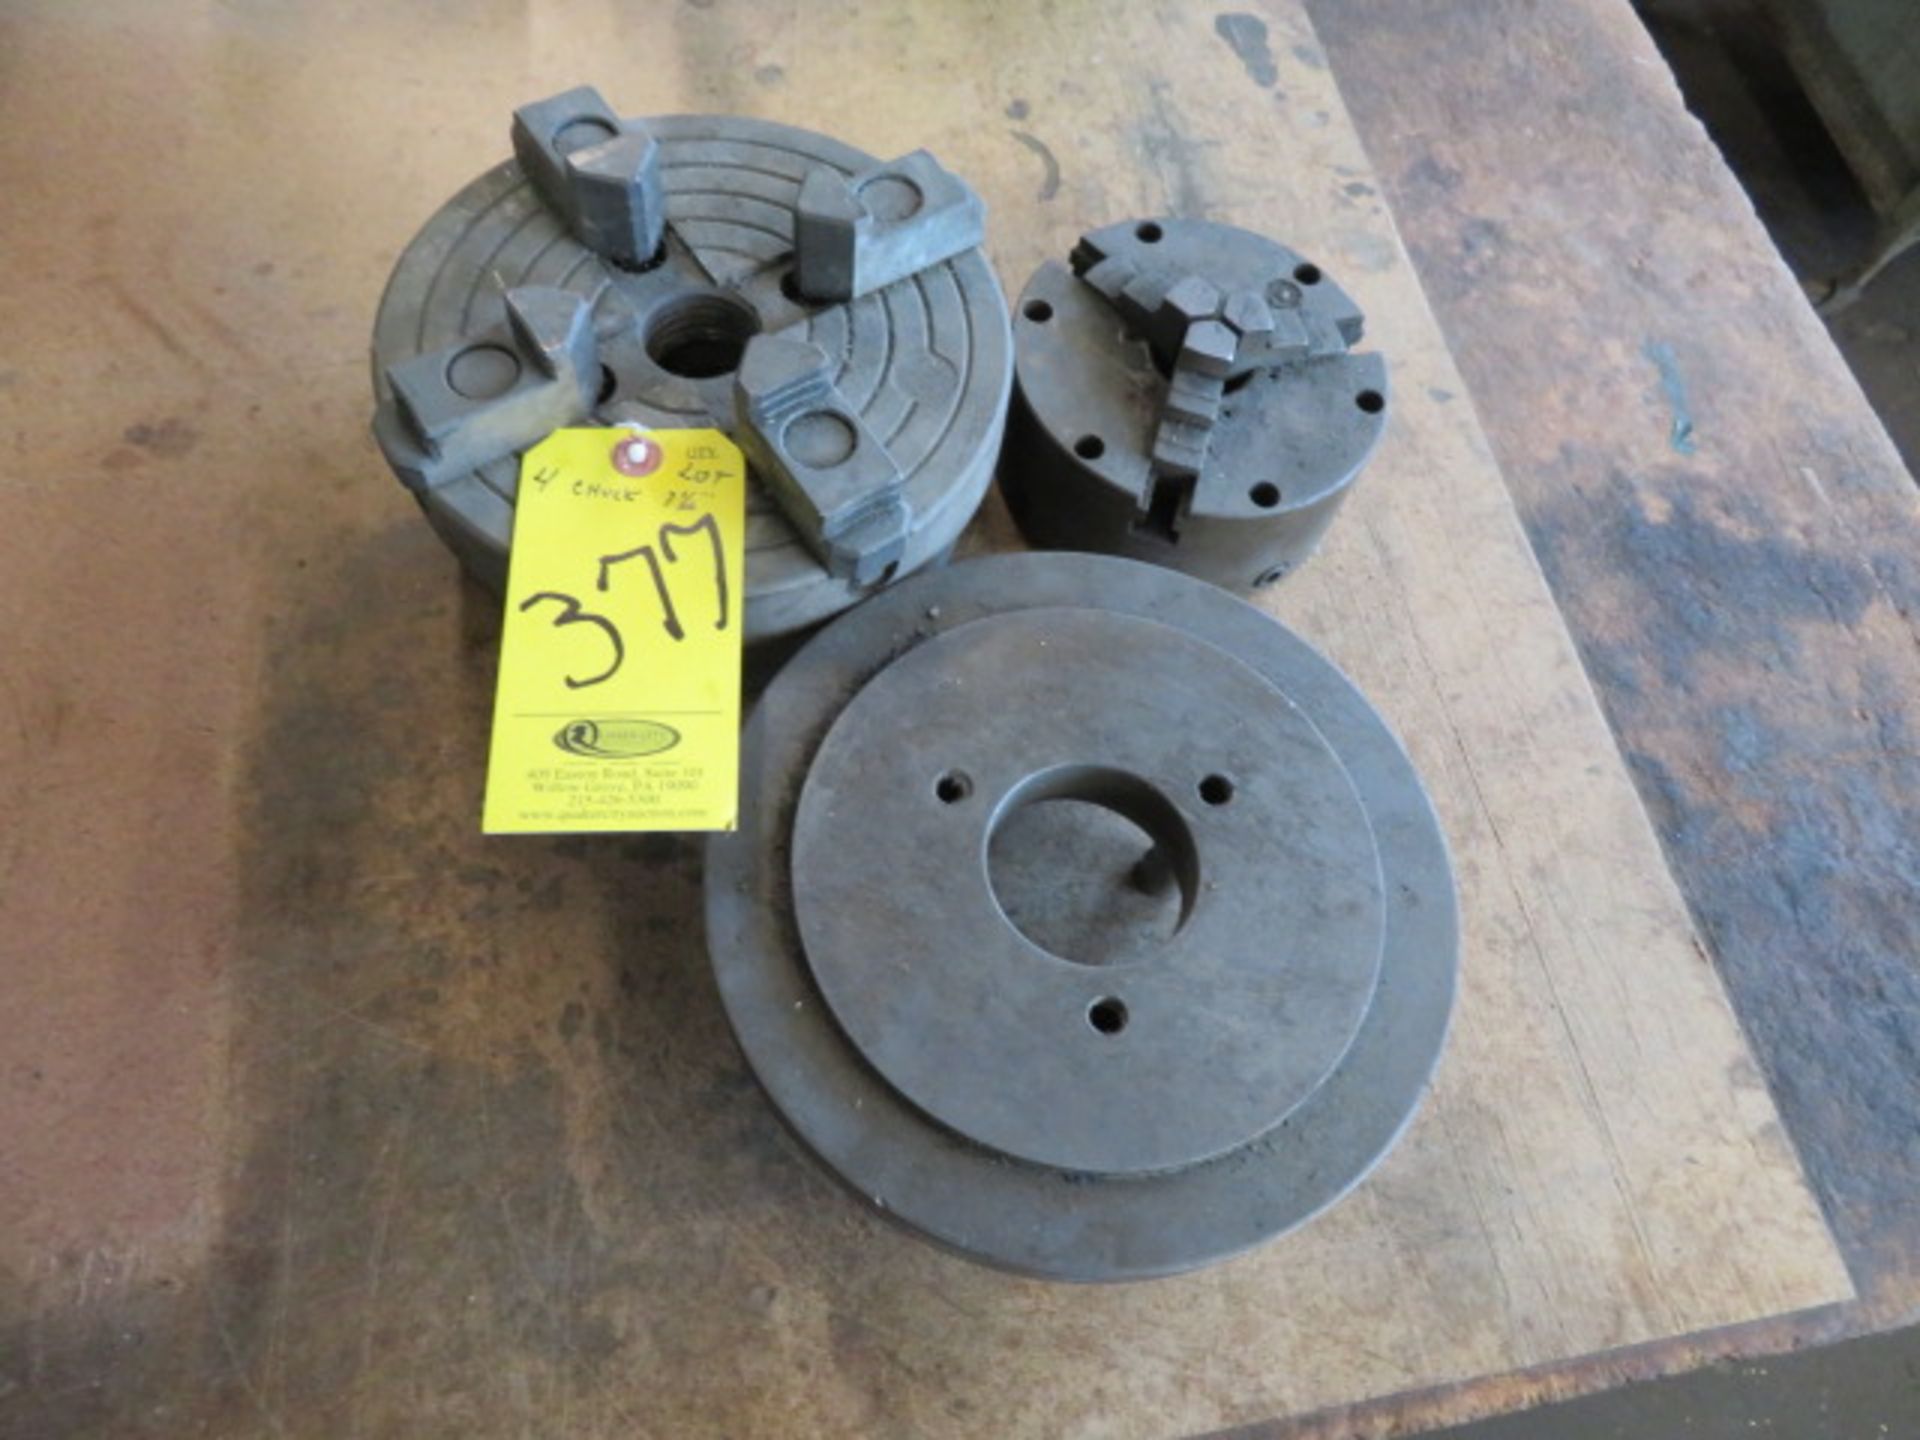 4-JAW CHUCK, 3-JAW CHUCK AND FACE PLATE